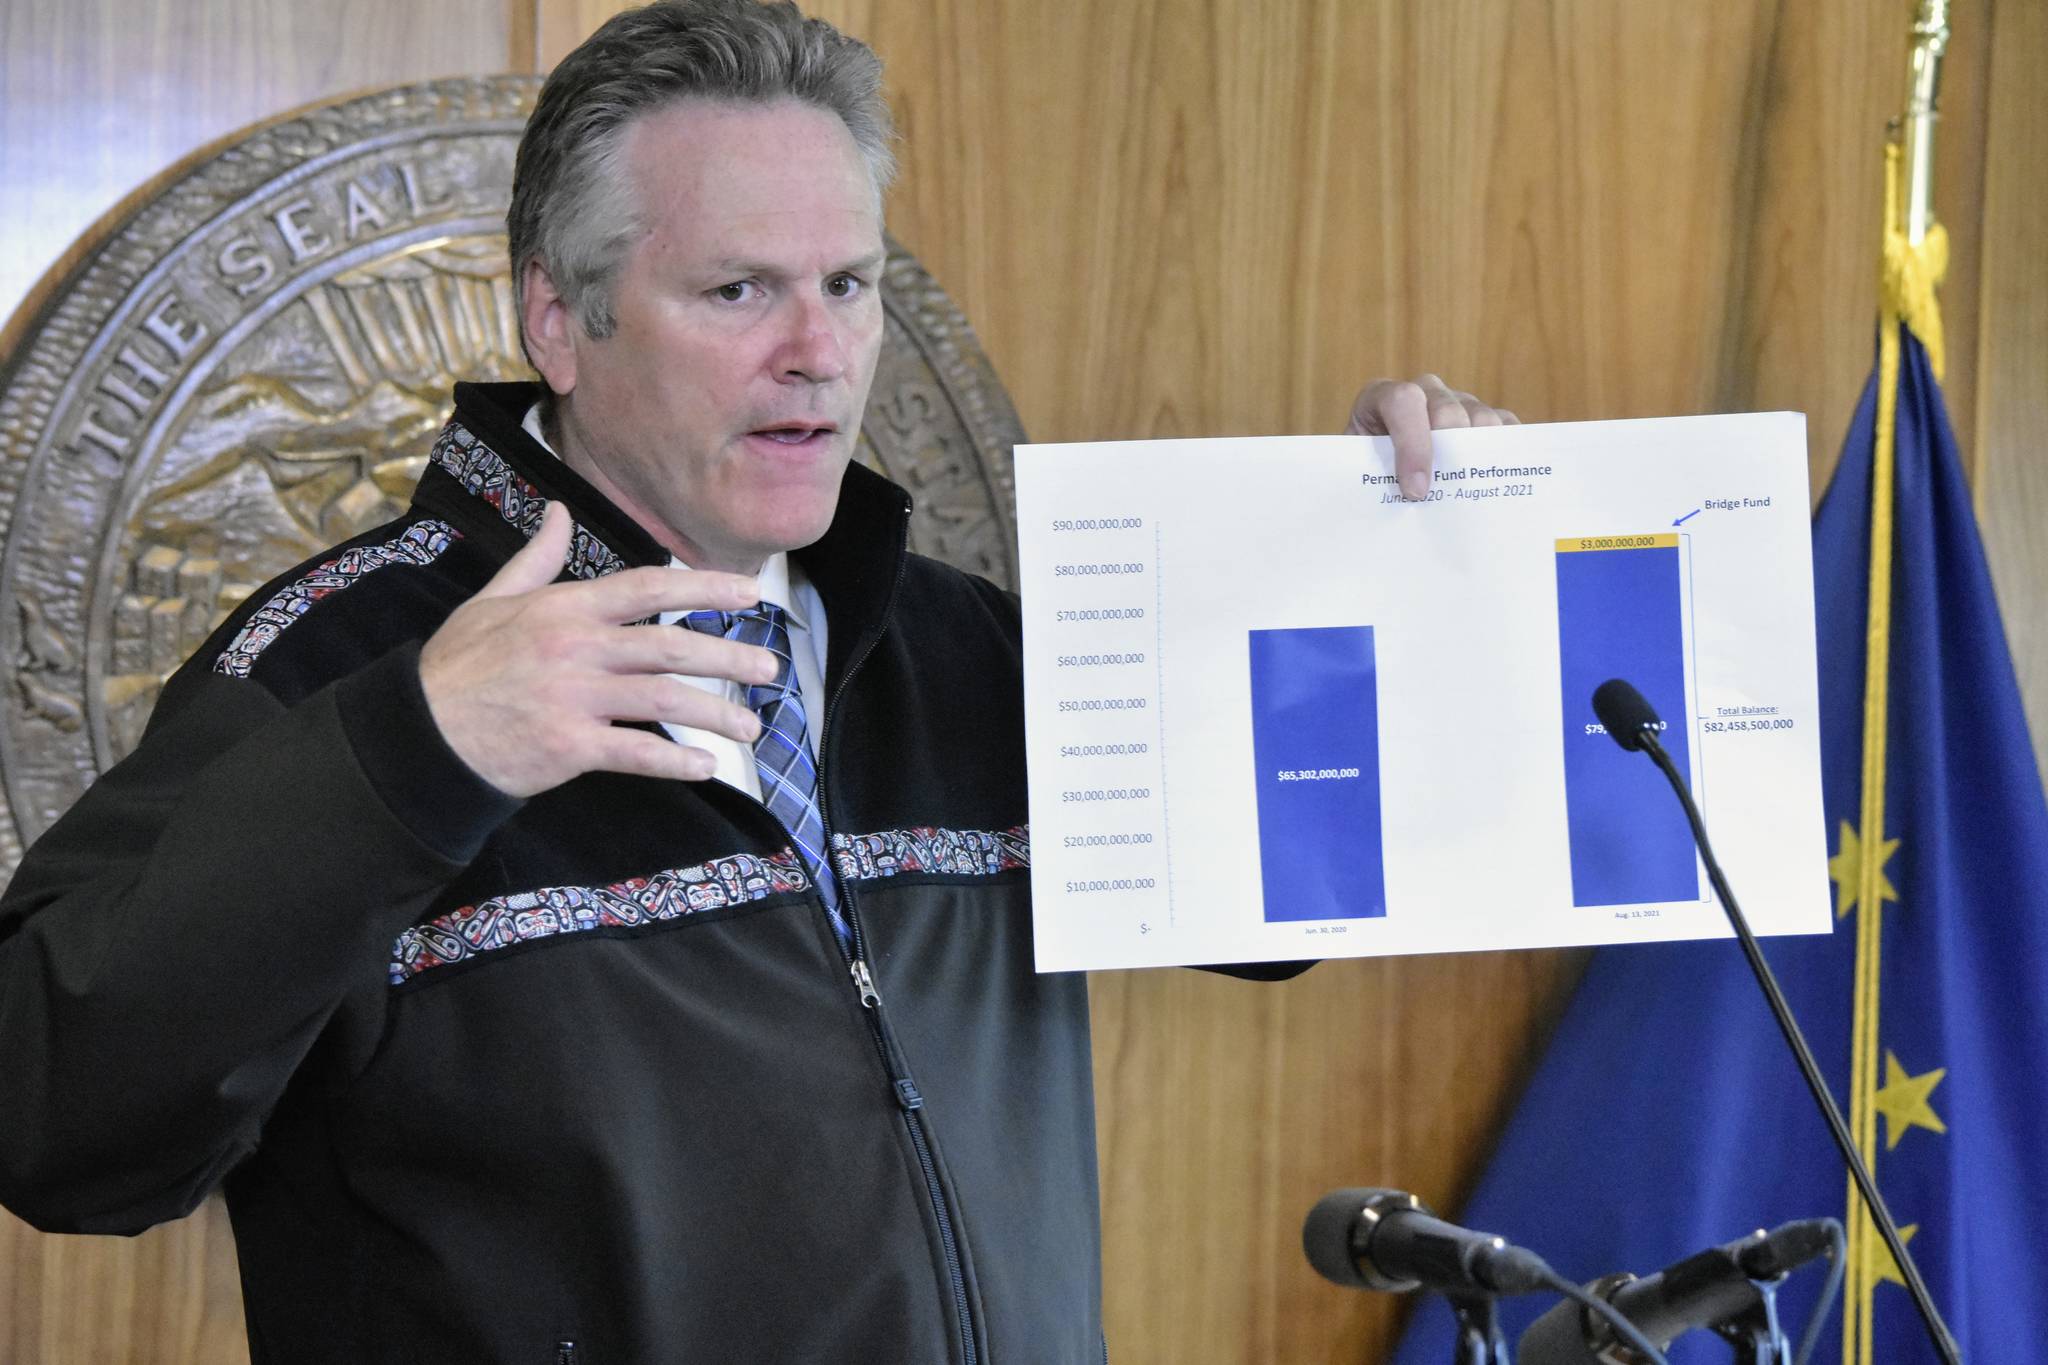 Gov. Mike Dunleavy holds up a graph showing the earnings of the Alaska Permanent Fund during a new conference at the Alaska State Capitol on Monday, Aug. 16, 2021. Lawmakers have asked the governor to amend the call of the special session, allowing them to address the budget which remains only partially funded. (Peter Segall / Juneau Empire)